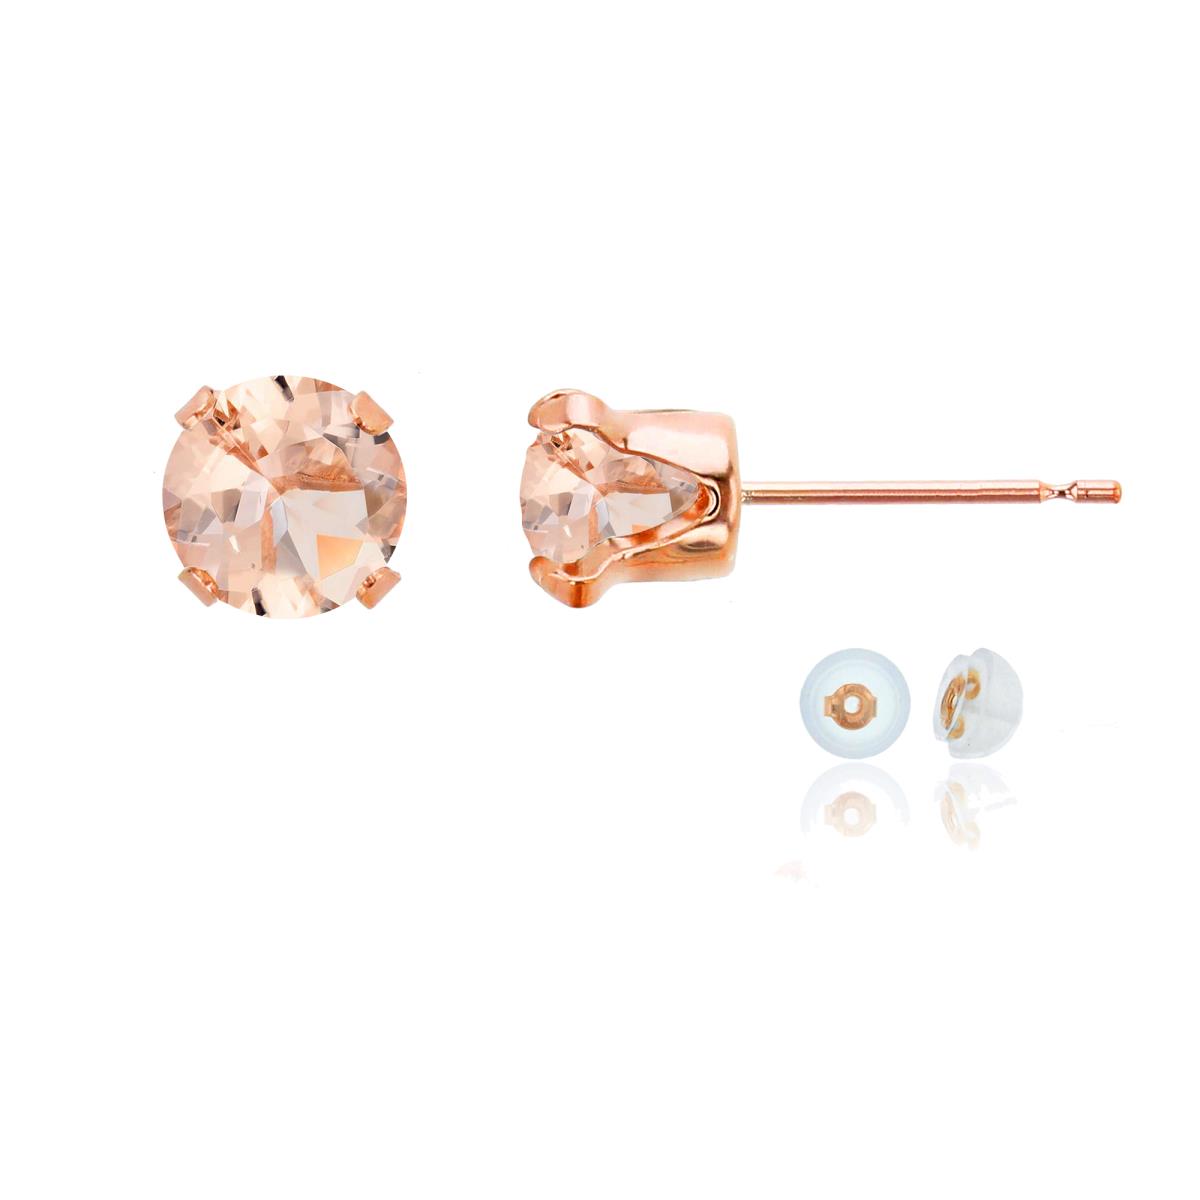 10K Rose Gold 6mm Round Morganite Stud Earring with Silicone Back